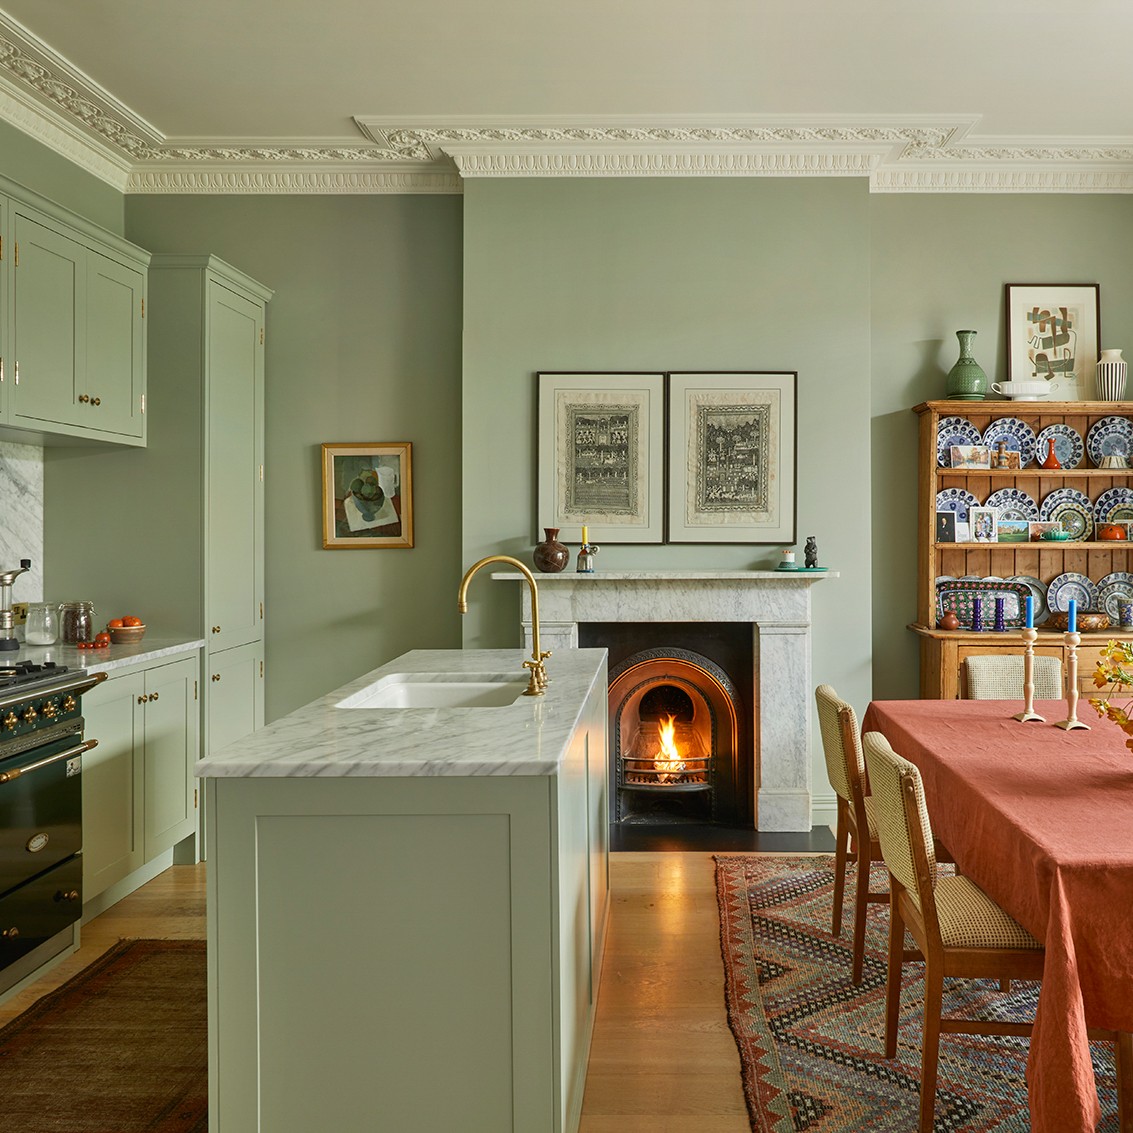 The preview image of an Know Your Greens: Our Experts Handpick The 18 Best Paint Colors article